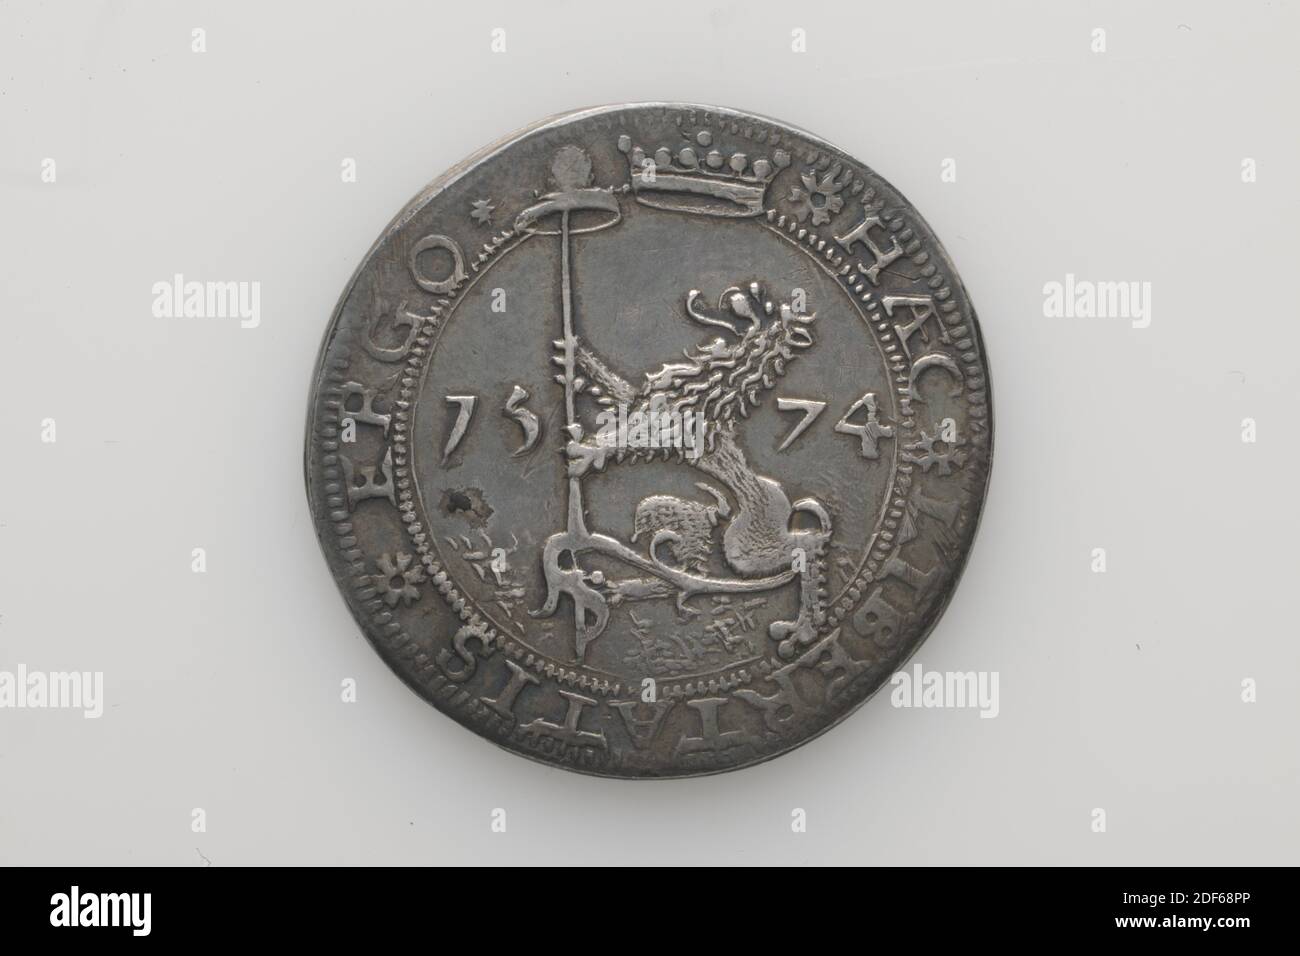 Anonymous, Verm. First quarter of the 17th century, minted, General: 3.7 x 0.2cm (37 x 2mm), Weight: 18.7g, Silver key of 20 cents paper emergency coin. The paper emergency coin was minted during the siege of Leiden, 1574. On the obverse is a standing lion, facing left on a ground with a lance with a freedom hat in the claws, between the year 1574. Above the lion, protruding in the rim , a crown is depicted. The circular HAEC LIBERTATIS ERGO runs around this. On the reverse is the central coat of arms of Leiden, depicted as two crossed keys in an ornamented shield, around which are the letters Stock Photo